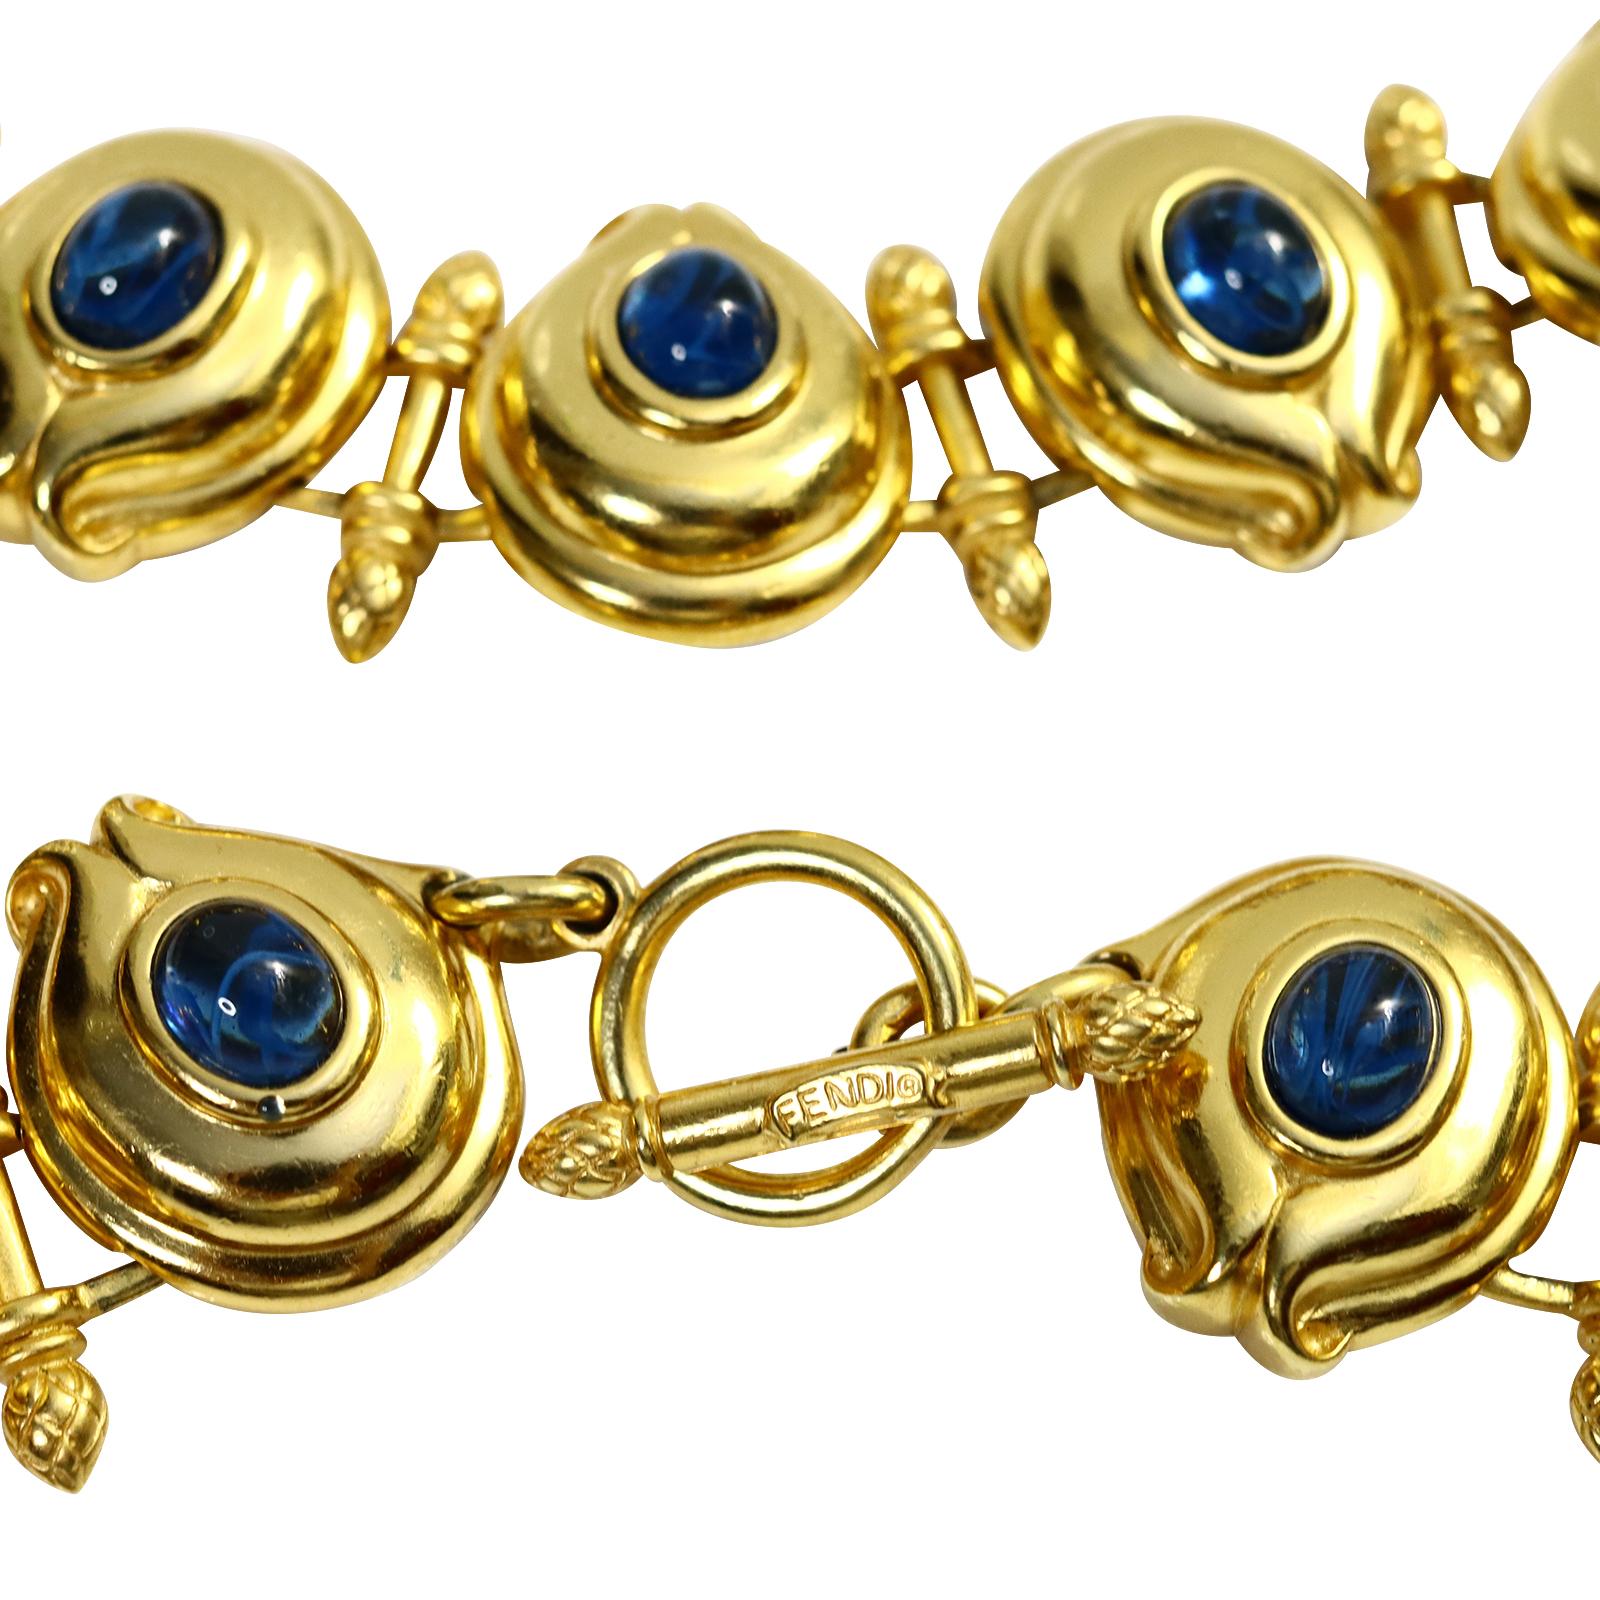 Vintage Fendi Gold Tone and Blue Cabochon Toggle Necklace Circa 1980s In Good Condition For Sale In New York, NY